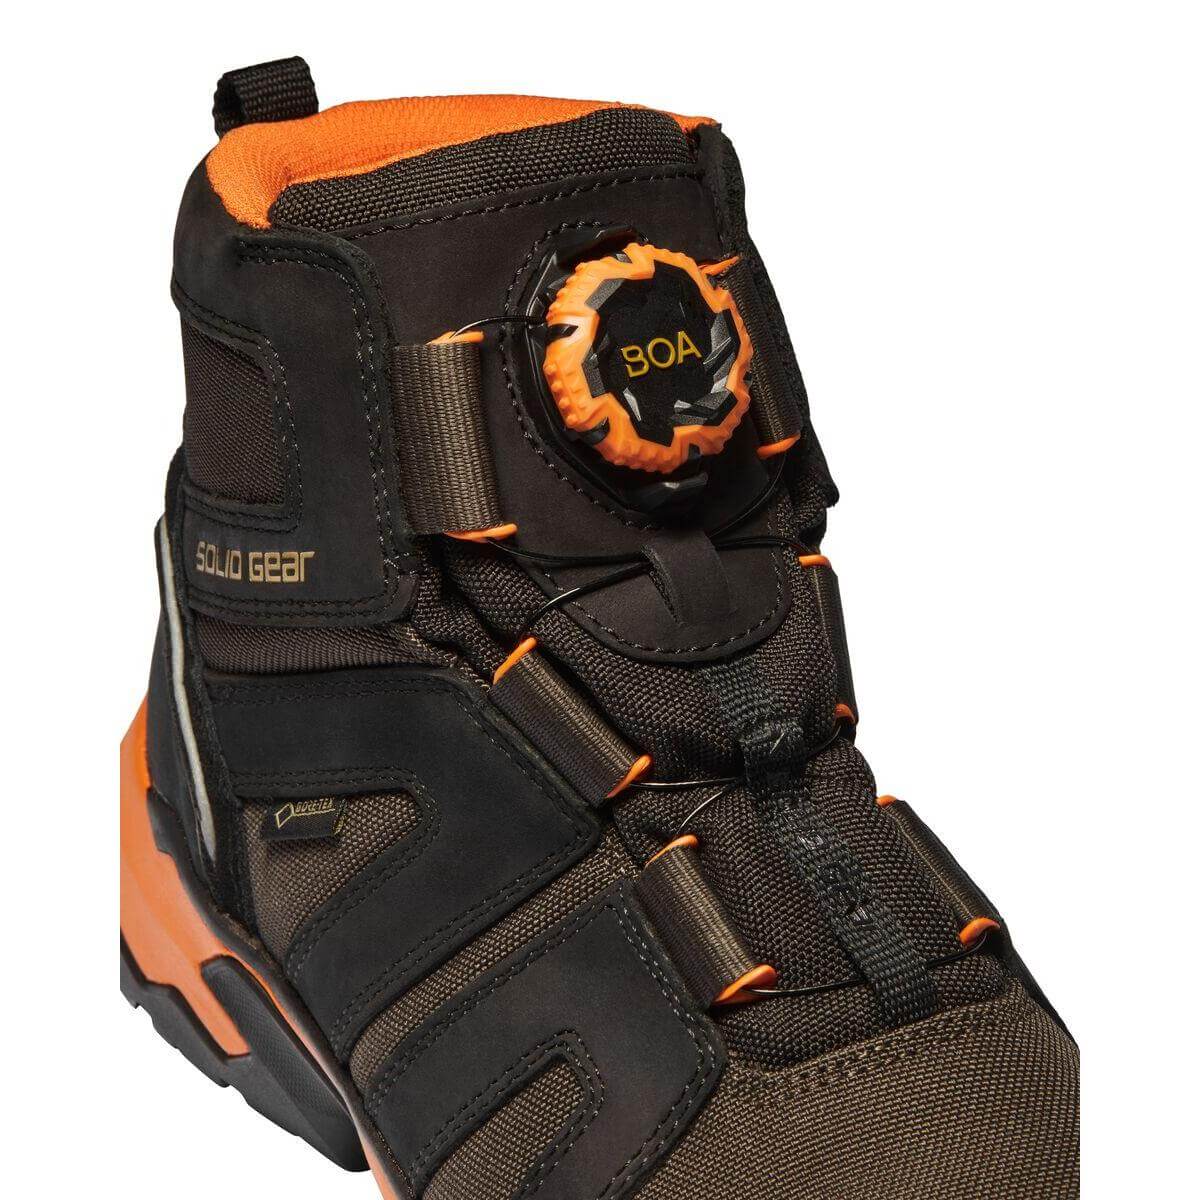 Solid Gear by Snickers 81002 Tigris GTX AG Mid Cut Wide Fit Gore Tex Waterproof S3 BOA Composite Toe Cap Safety Boots Black Orange 06 #colour_black-orange